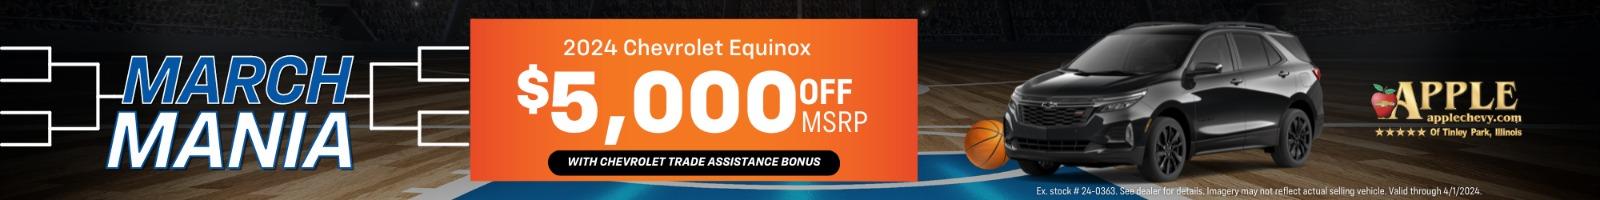 2024 Chevy Equinox $5,000 OFF MSRP